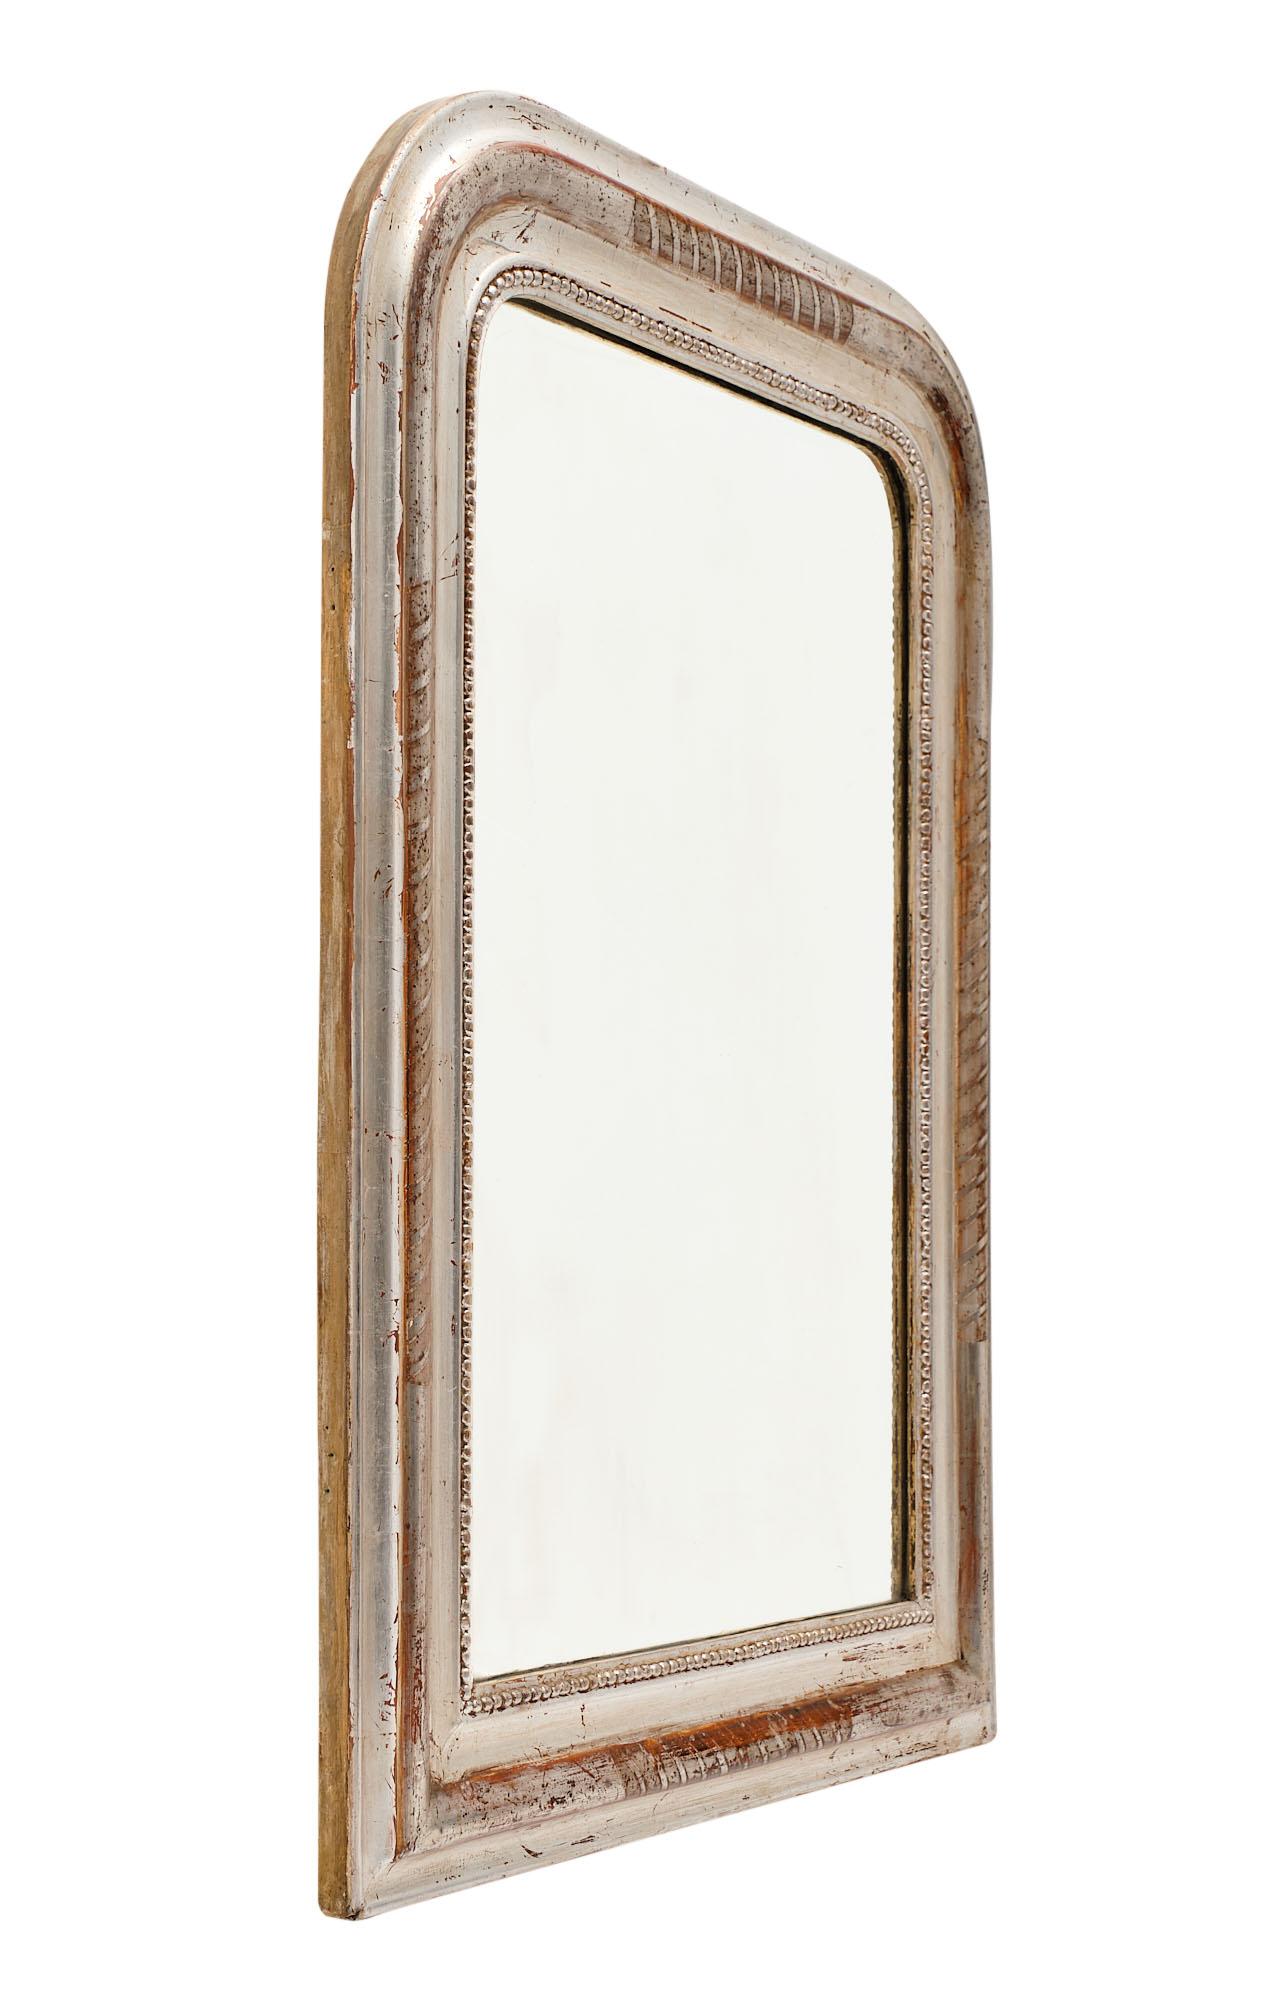 Silver leaf Louis Philippe period mirror with a wood and gesso frame that has hand-chiseled details and the beautiful sienna colored glaze showing through the silver leafing.